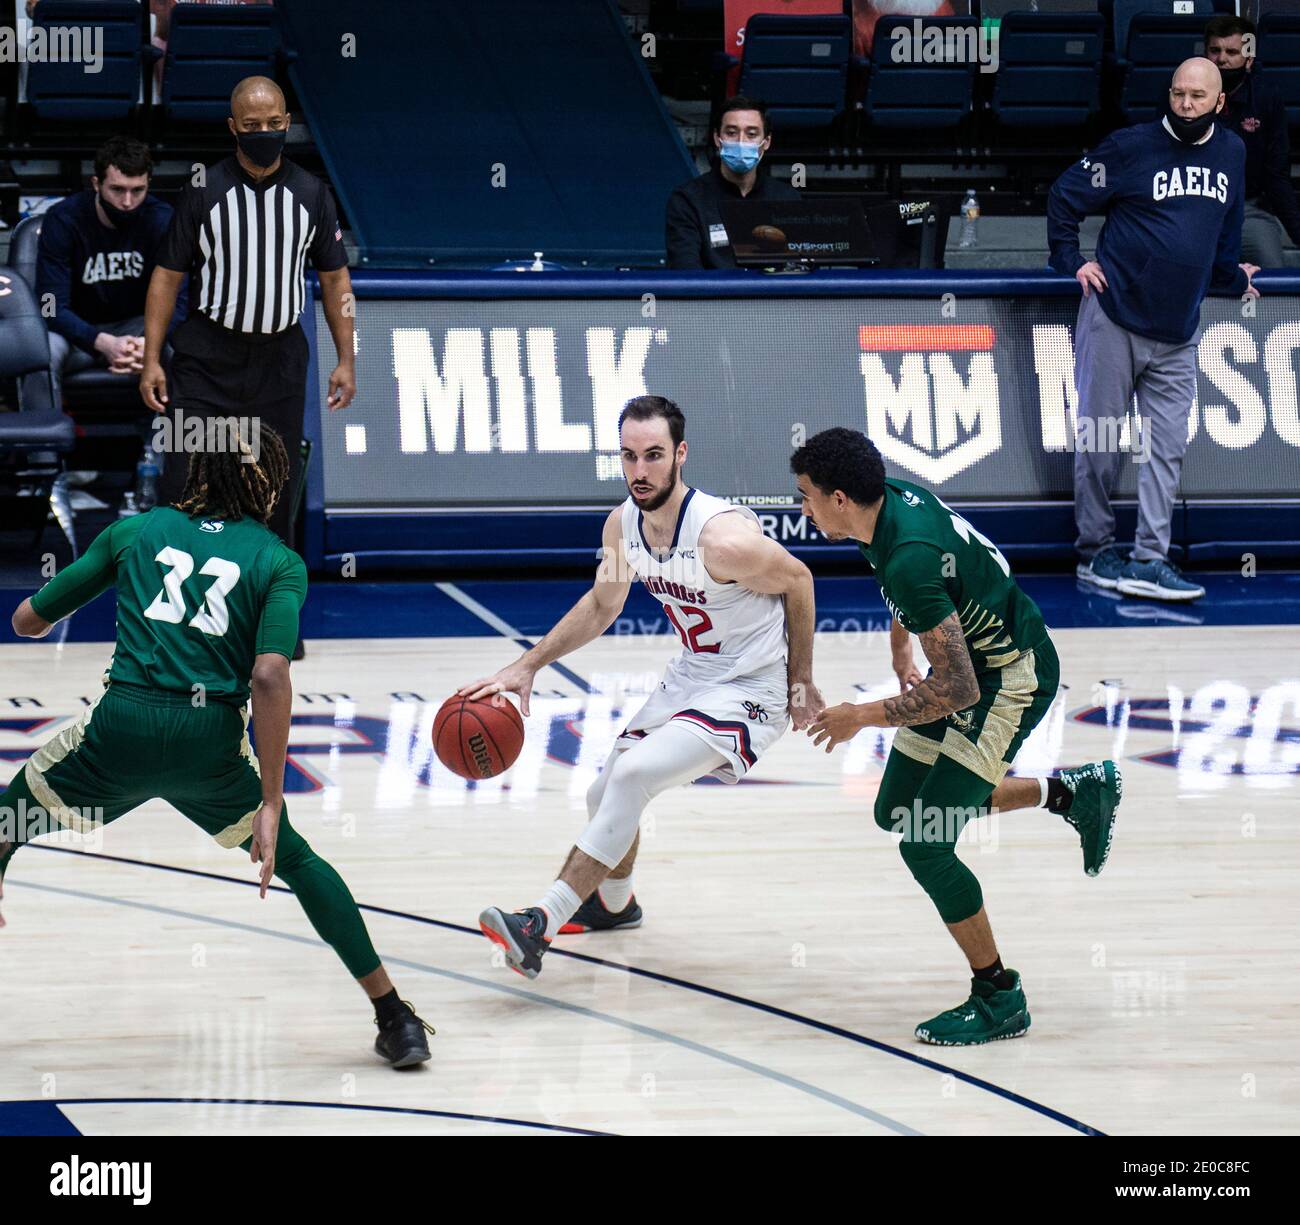 Moraga, CA U.S. 30th Dec, 2020. A. St. Mary's Gaels guard Tommy Kuhse (12) brings the ball up court during the NCAA Men's Basketball game between Sacramento State Hornets and the Saint Mary's Gaels 63-45 win at McKeon Pavilion Moraga Calif. Thurman James/CSM/Alamy Live News Stock Photo